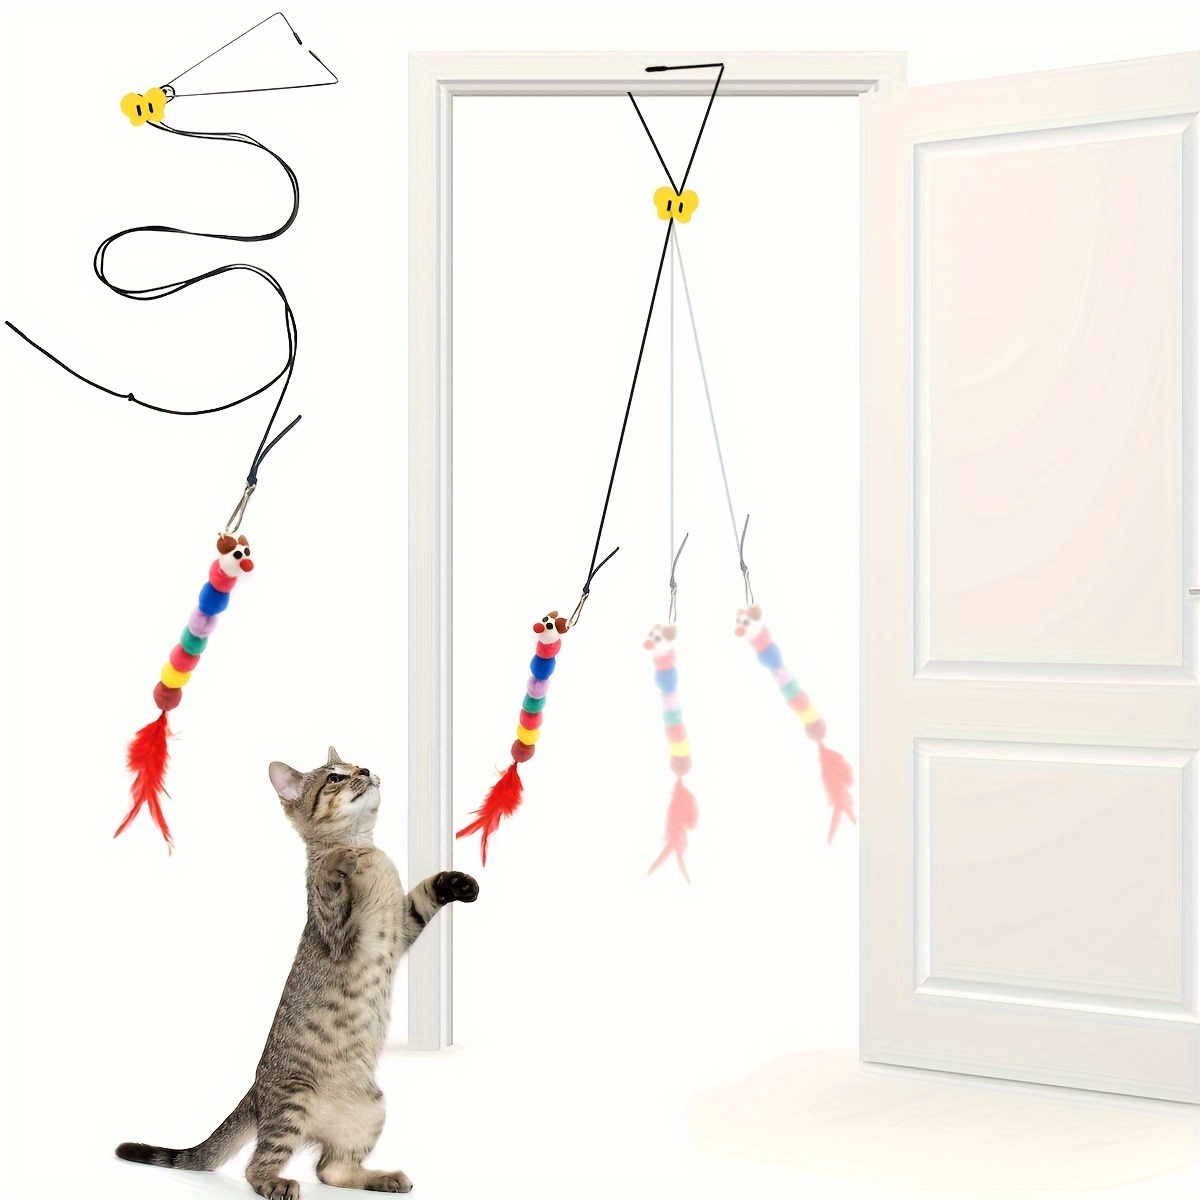 

Interactive Cat Teaser Toy - Adjustable Hanging Door Swing With Colorful Worms, Nylon/polyester/metal, Suitable For All Breeds